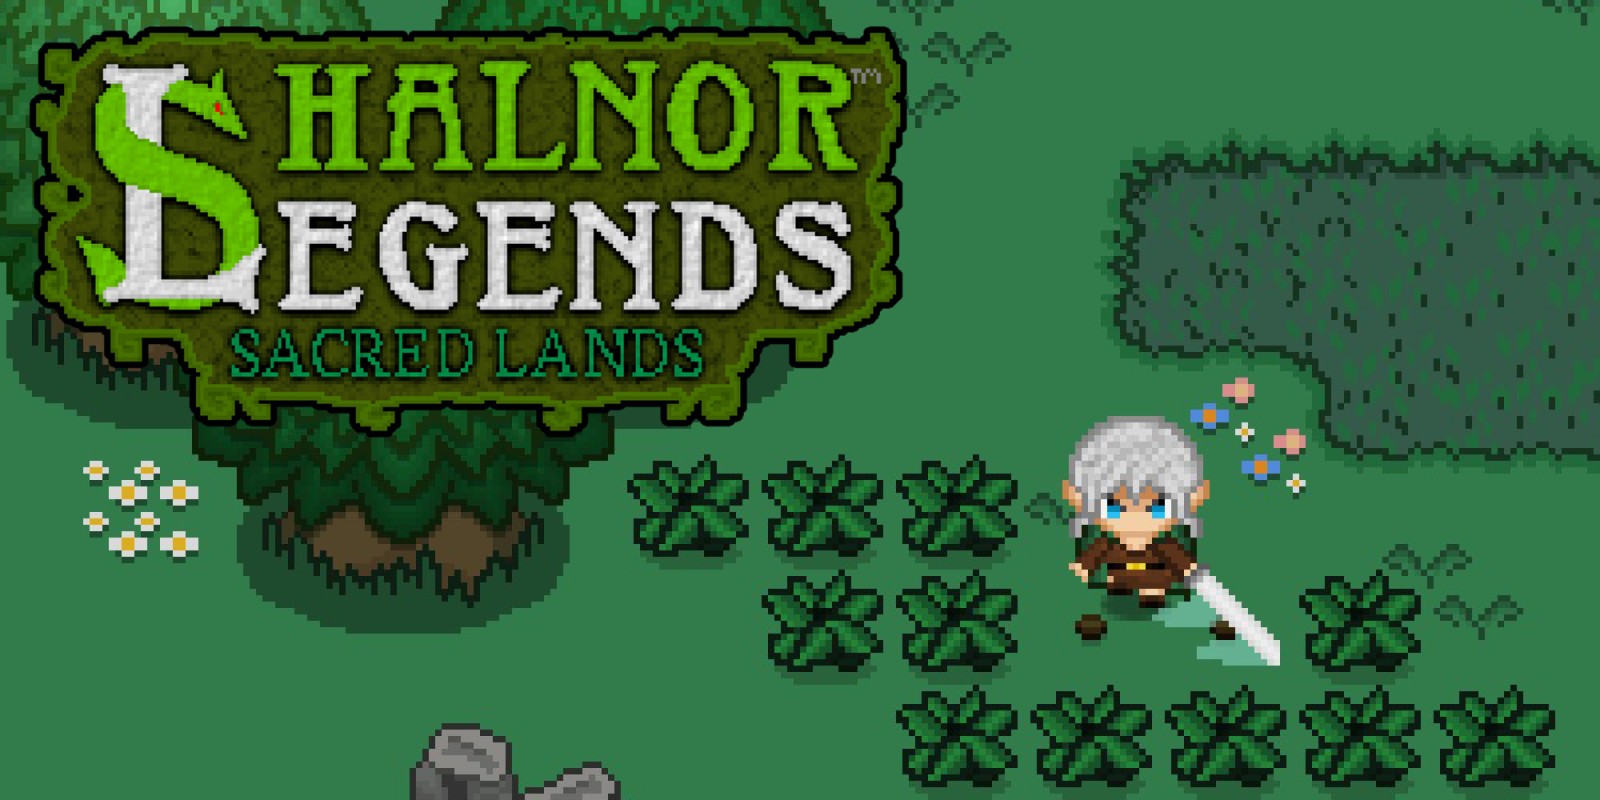 download the last version for windows Shalnor Legends 2: Trials of Thunder